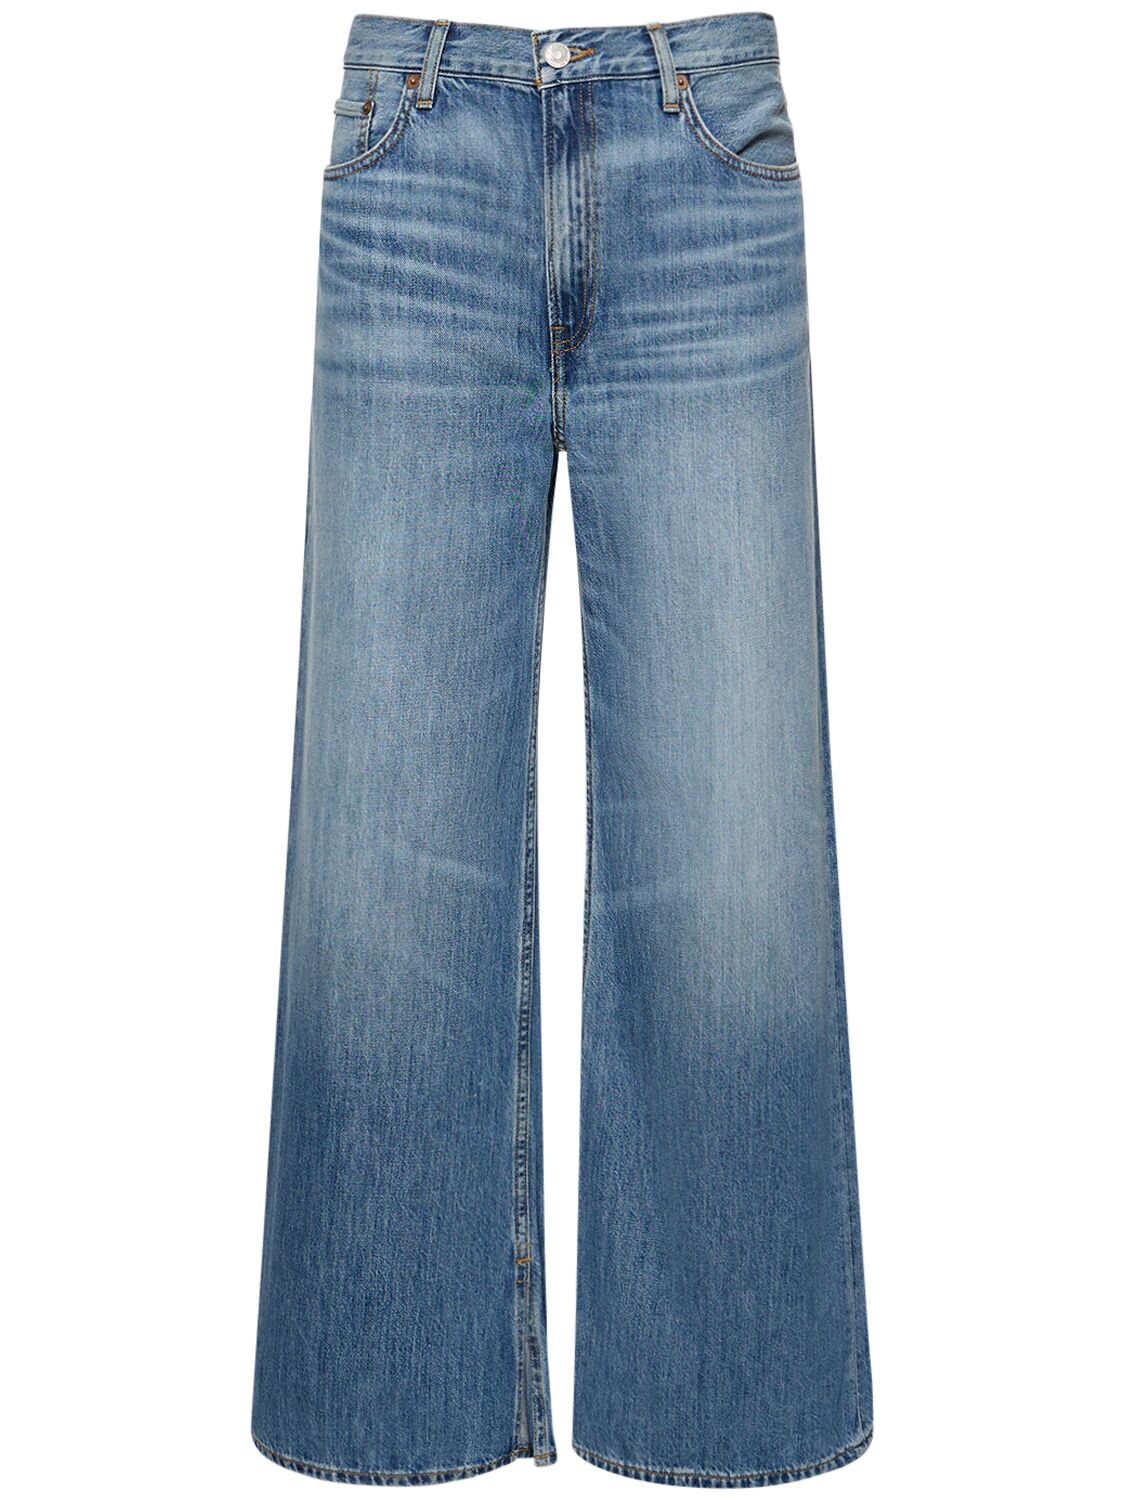 Low Rider Loose Cotton Blend Jeans image